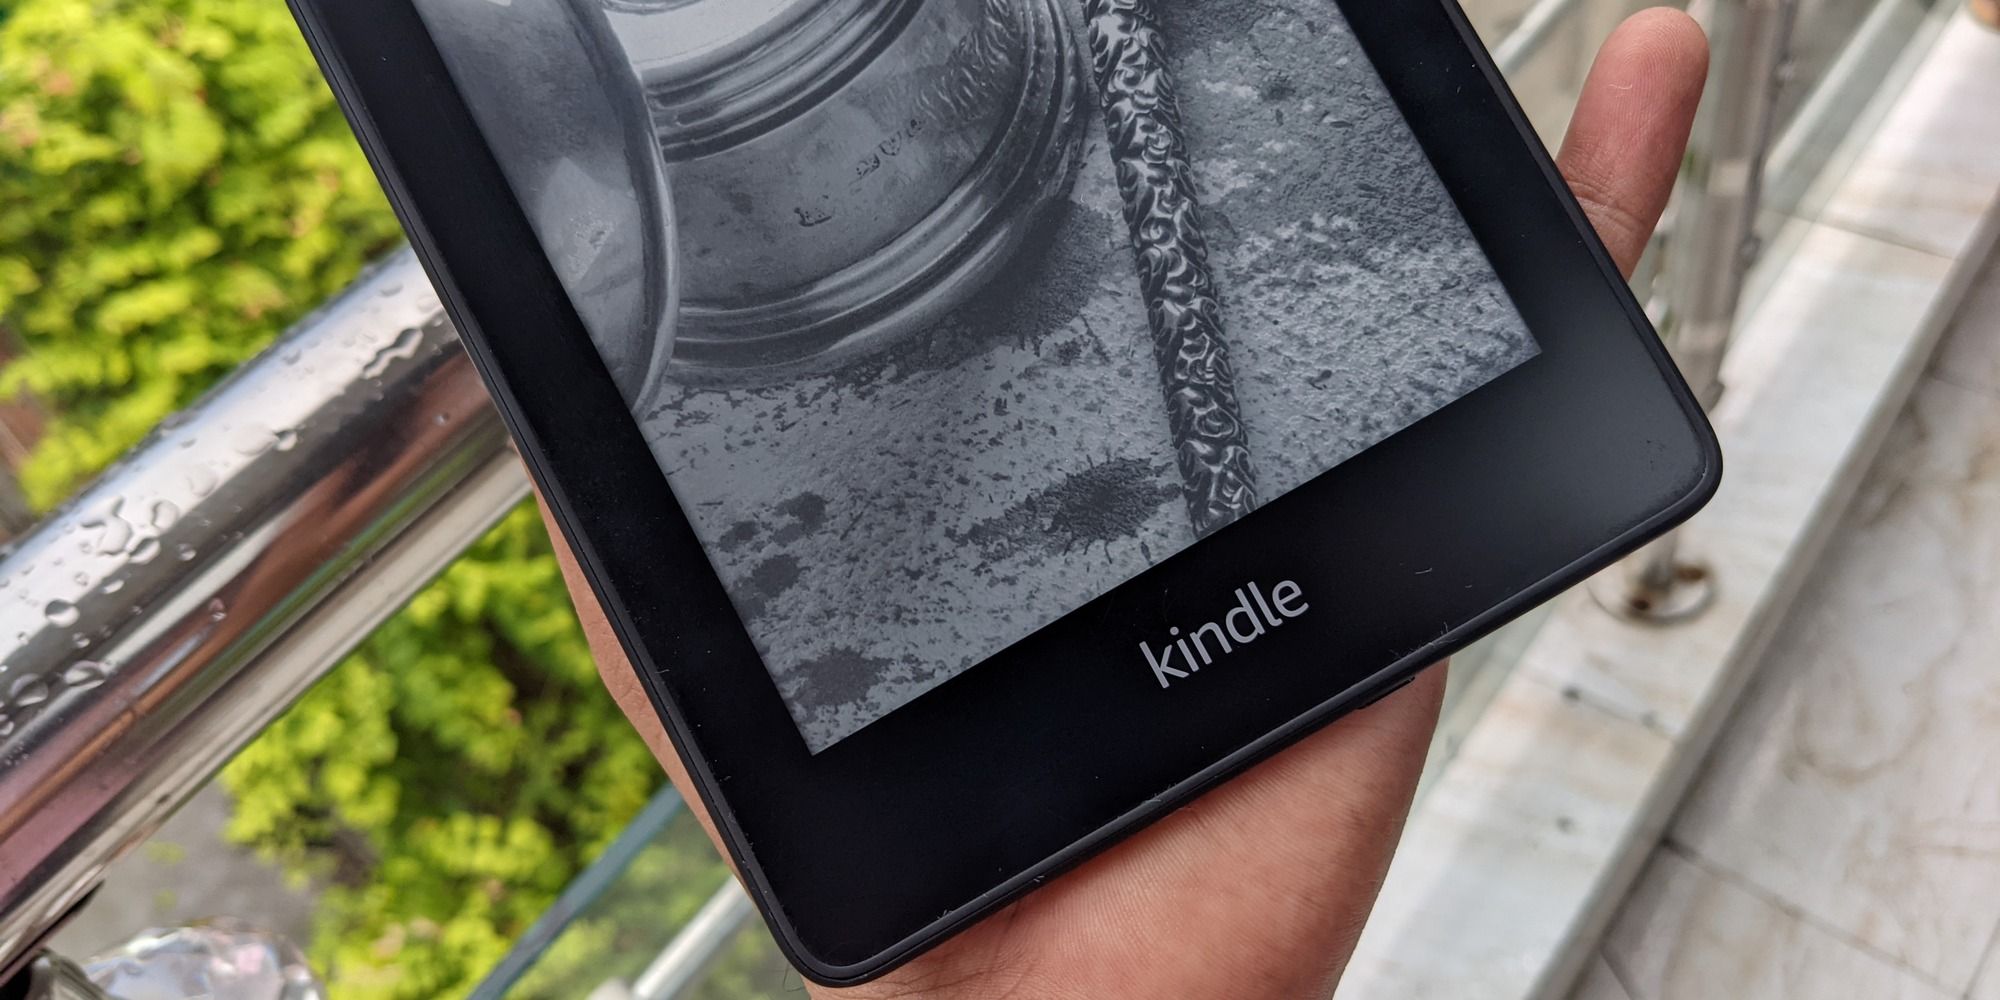 Older Kindle Models Are Losing Access To The Internet